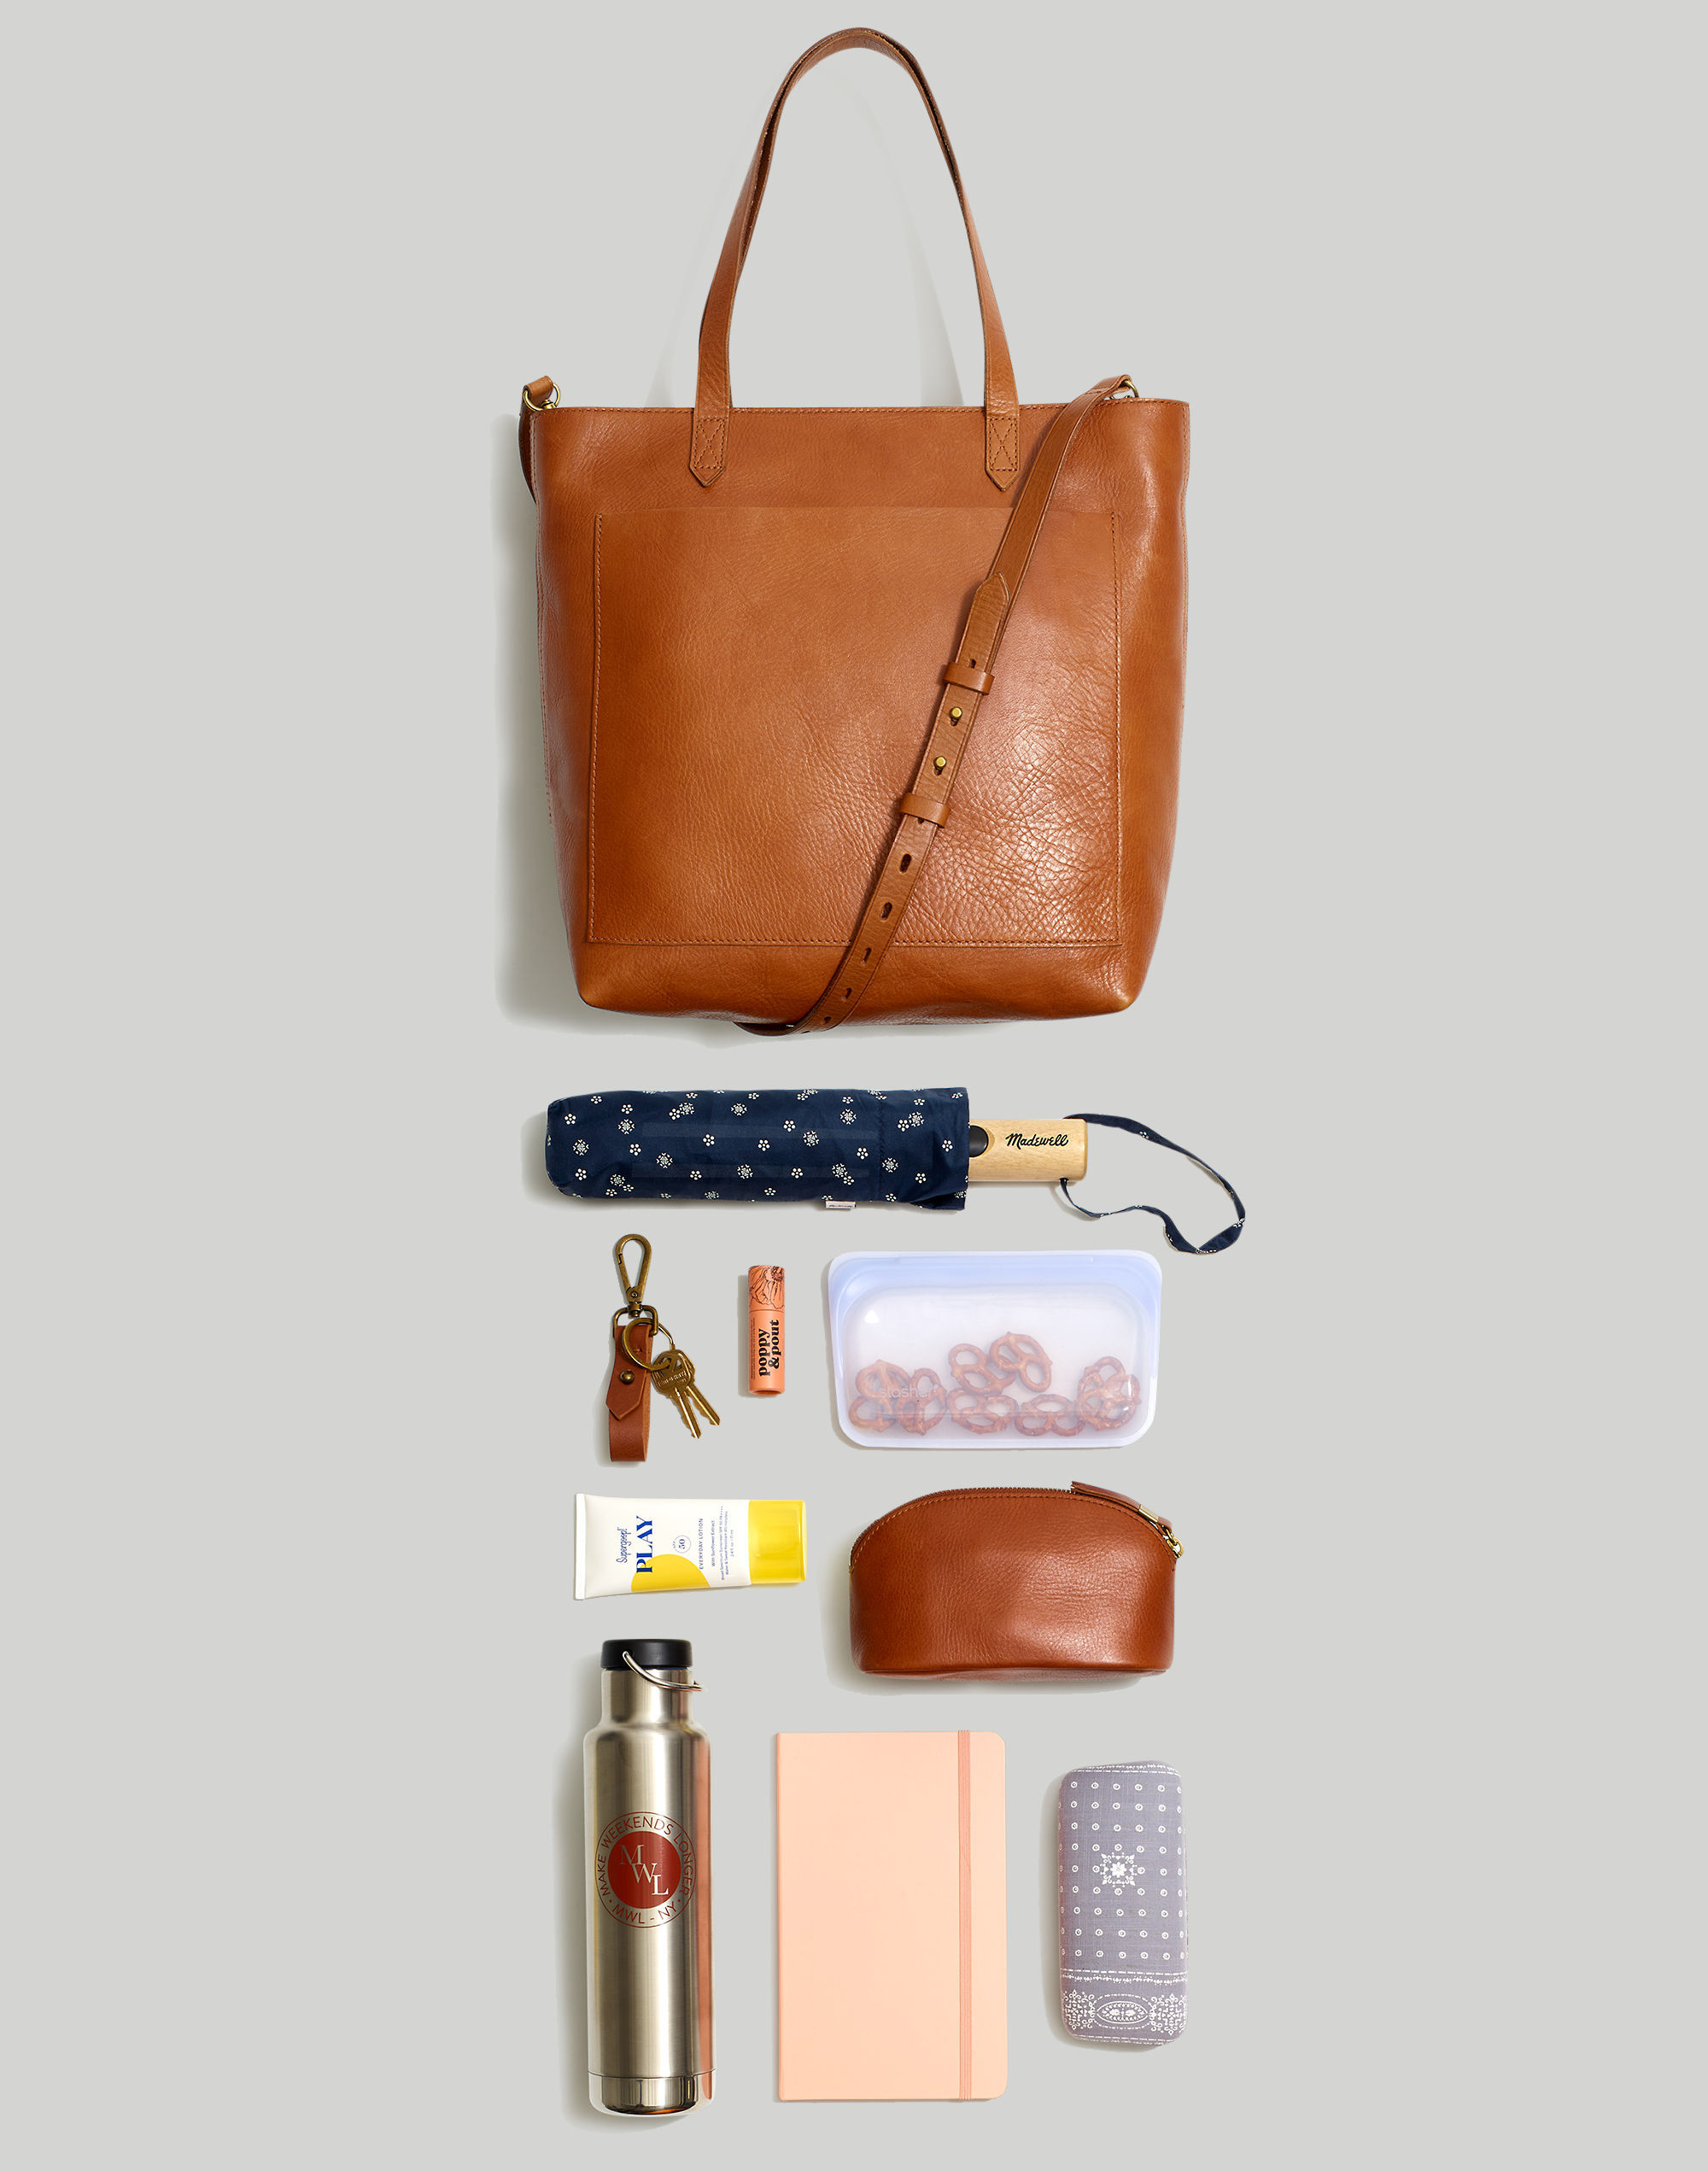 Madewell deal: Get the Madewell Medium Transport Tote for its